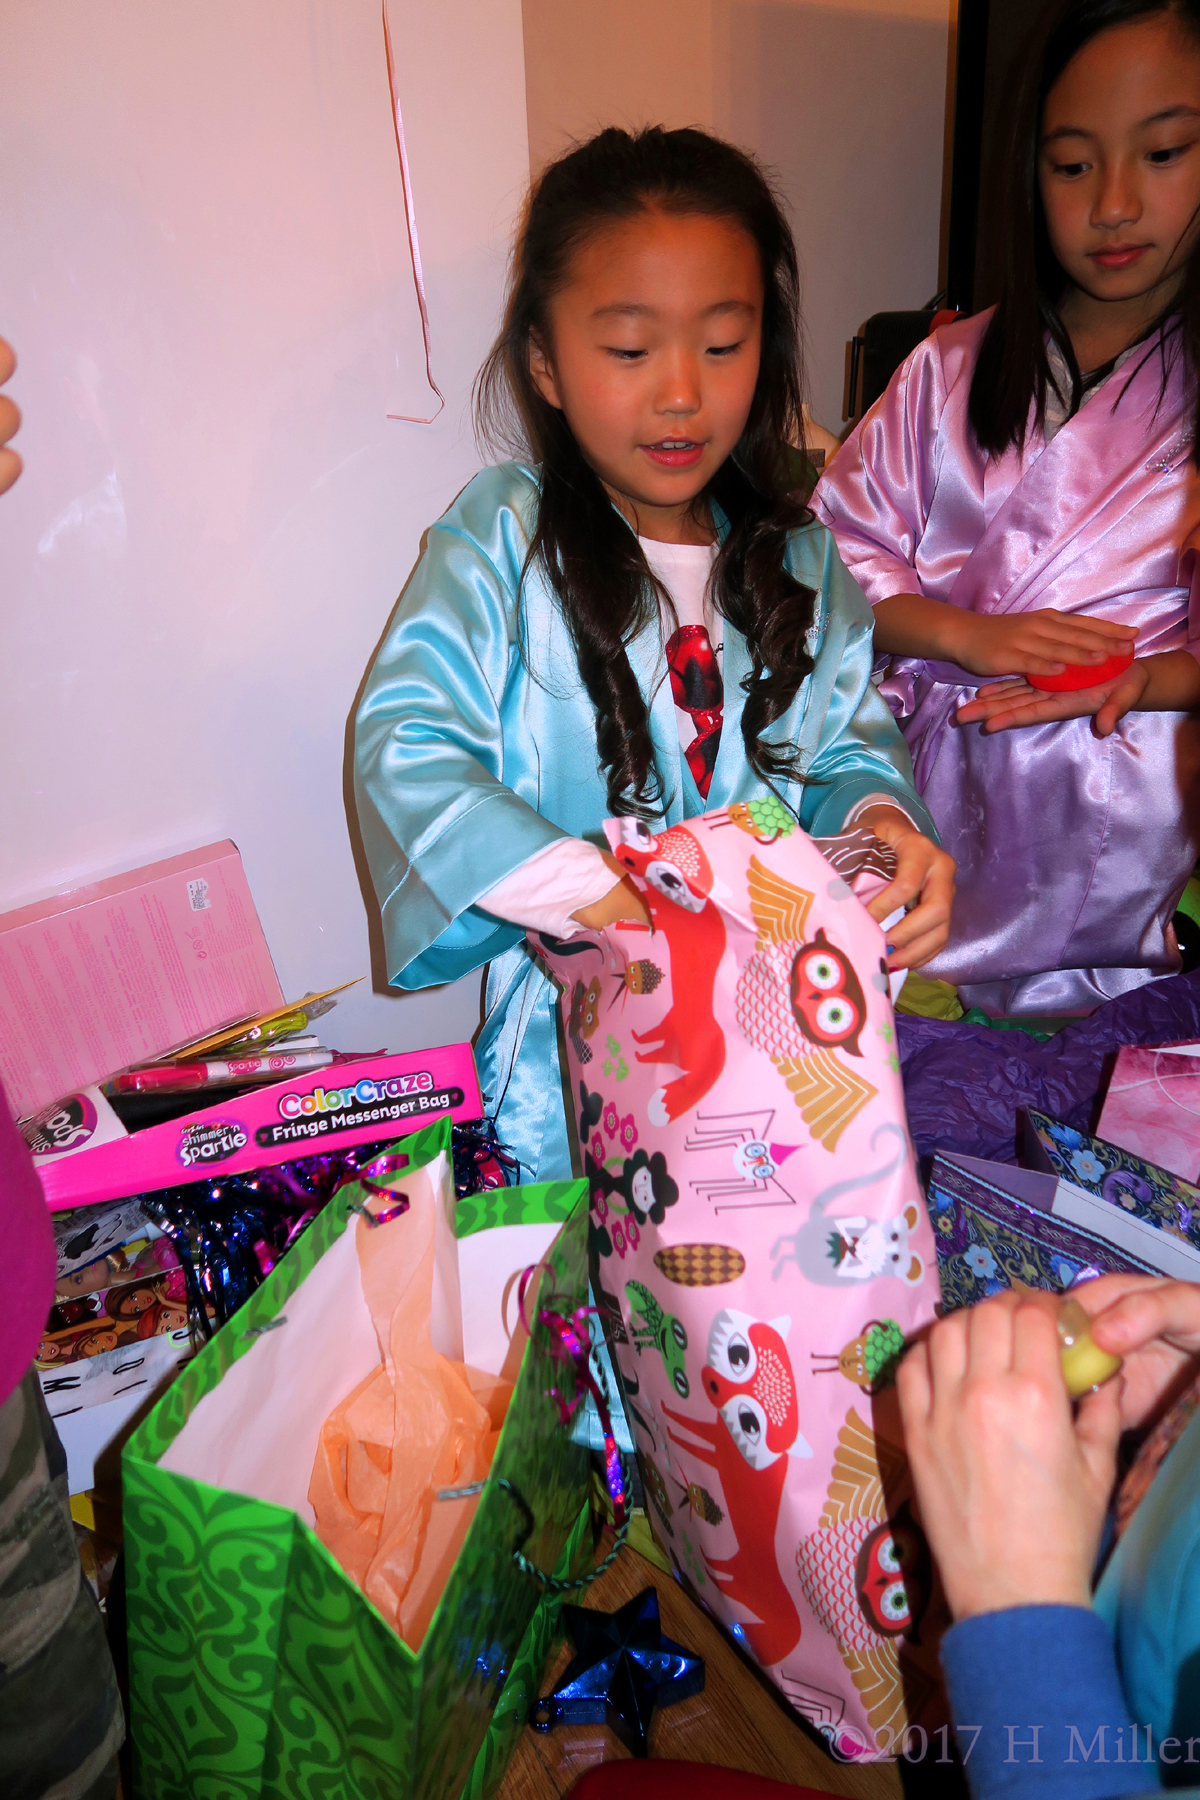 Lea's Happiness Increases With Each Opening Gift. 